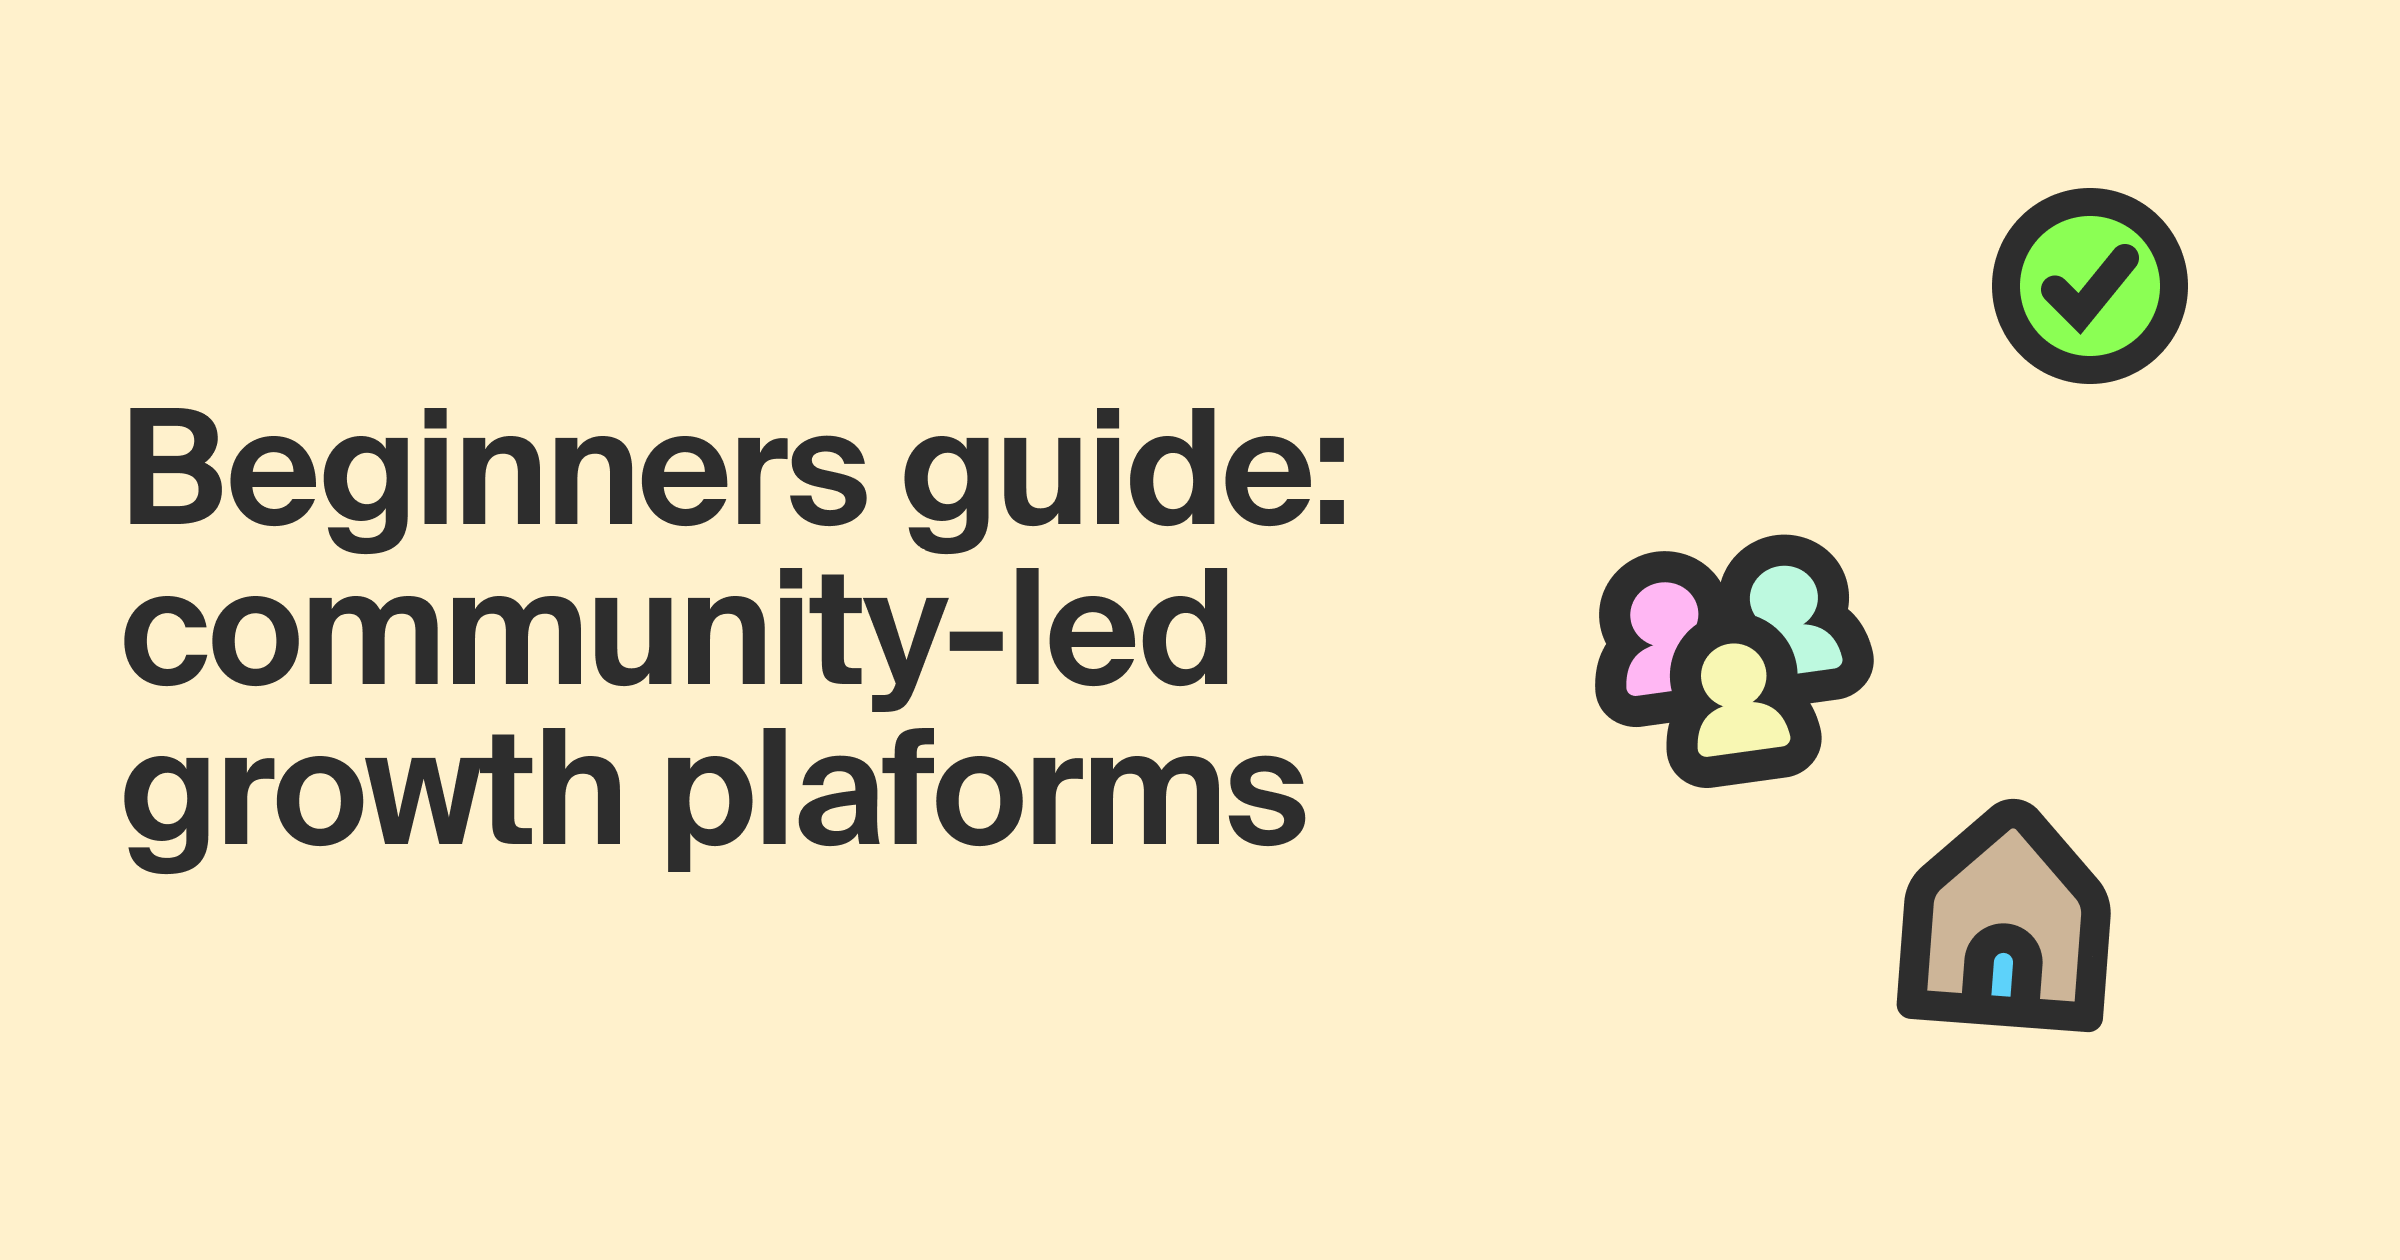 Beginners guide: community-led growth platforms